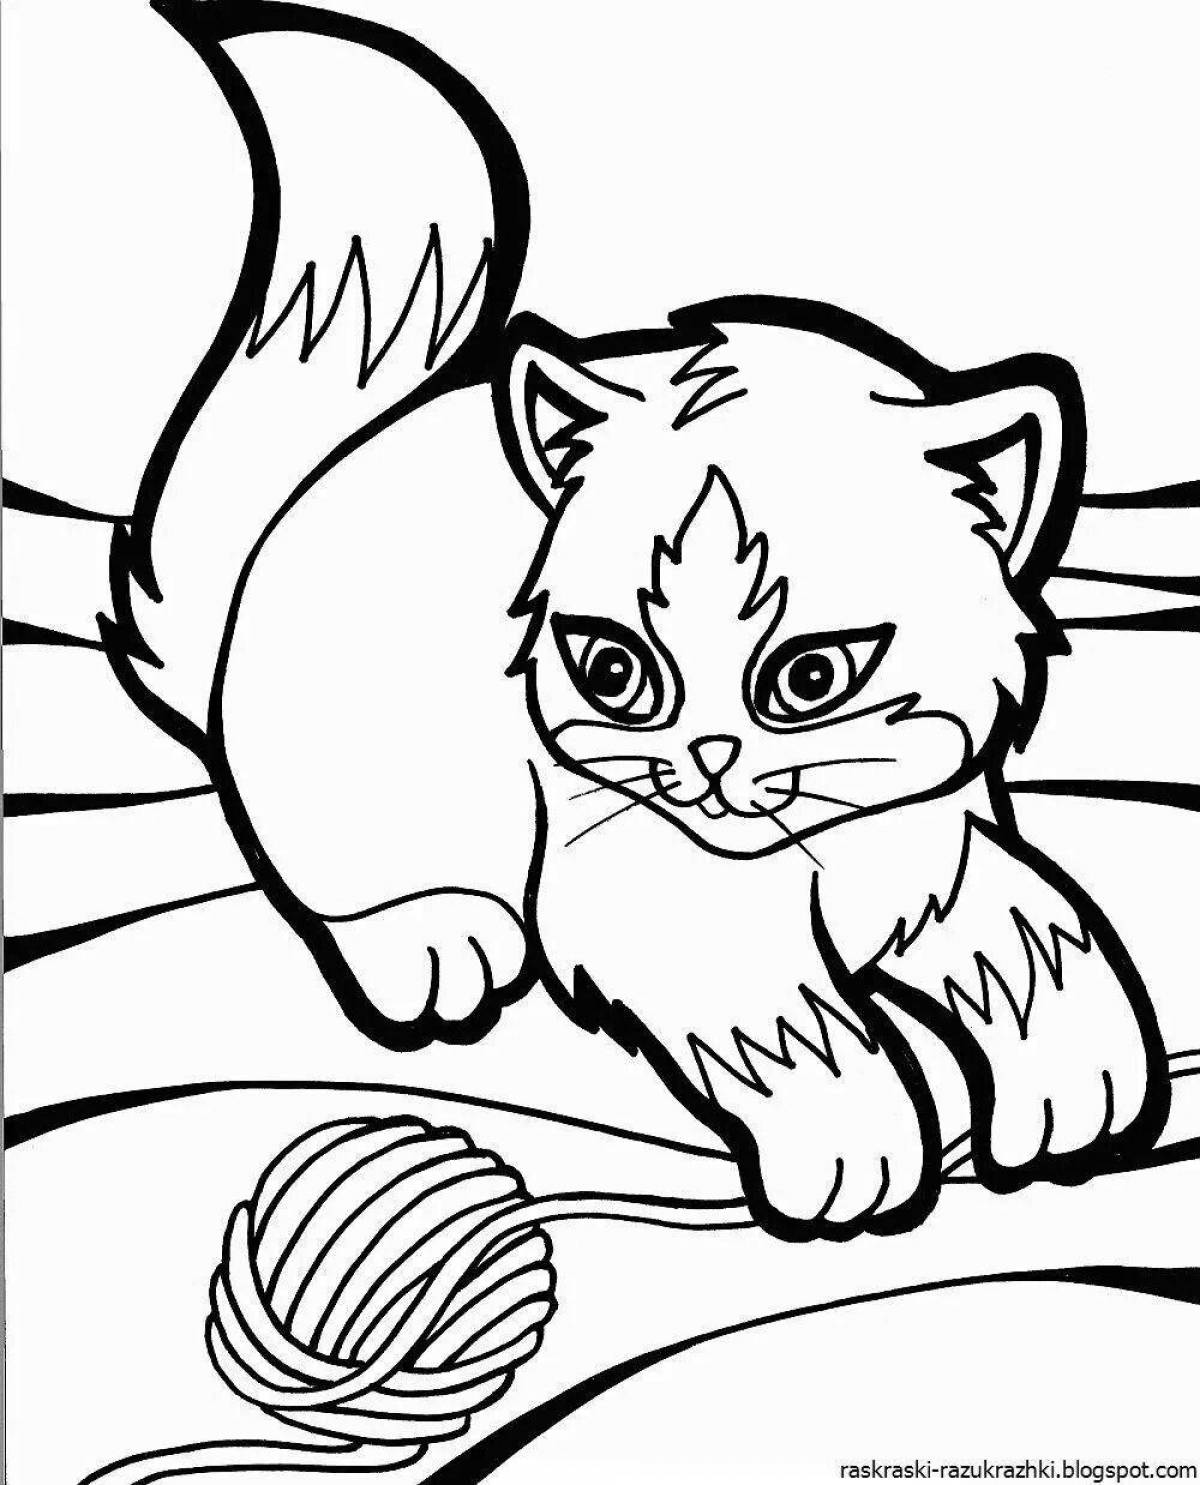 Exquisite kitty coloring book